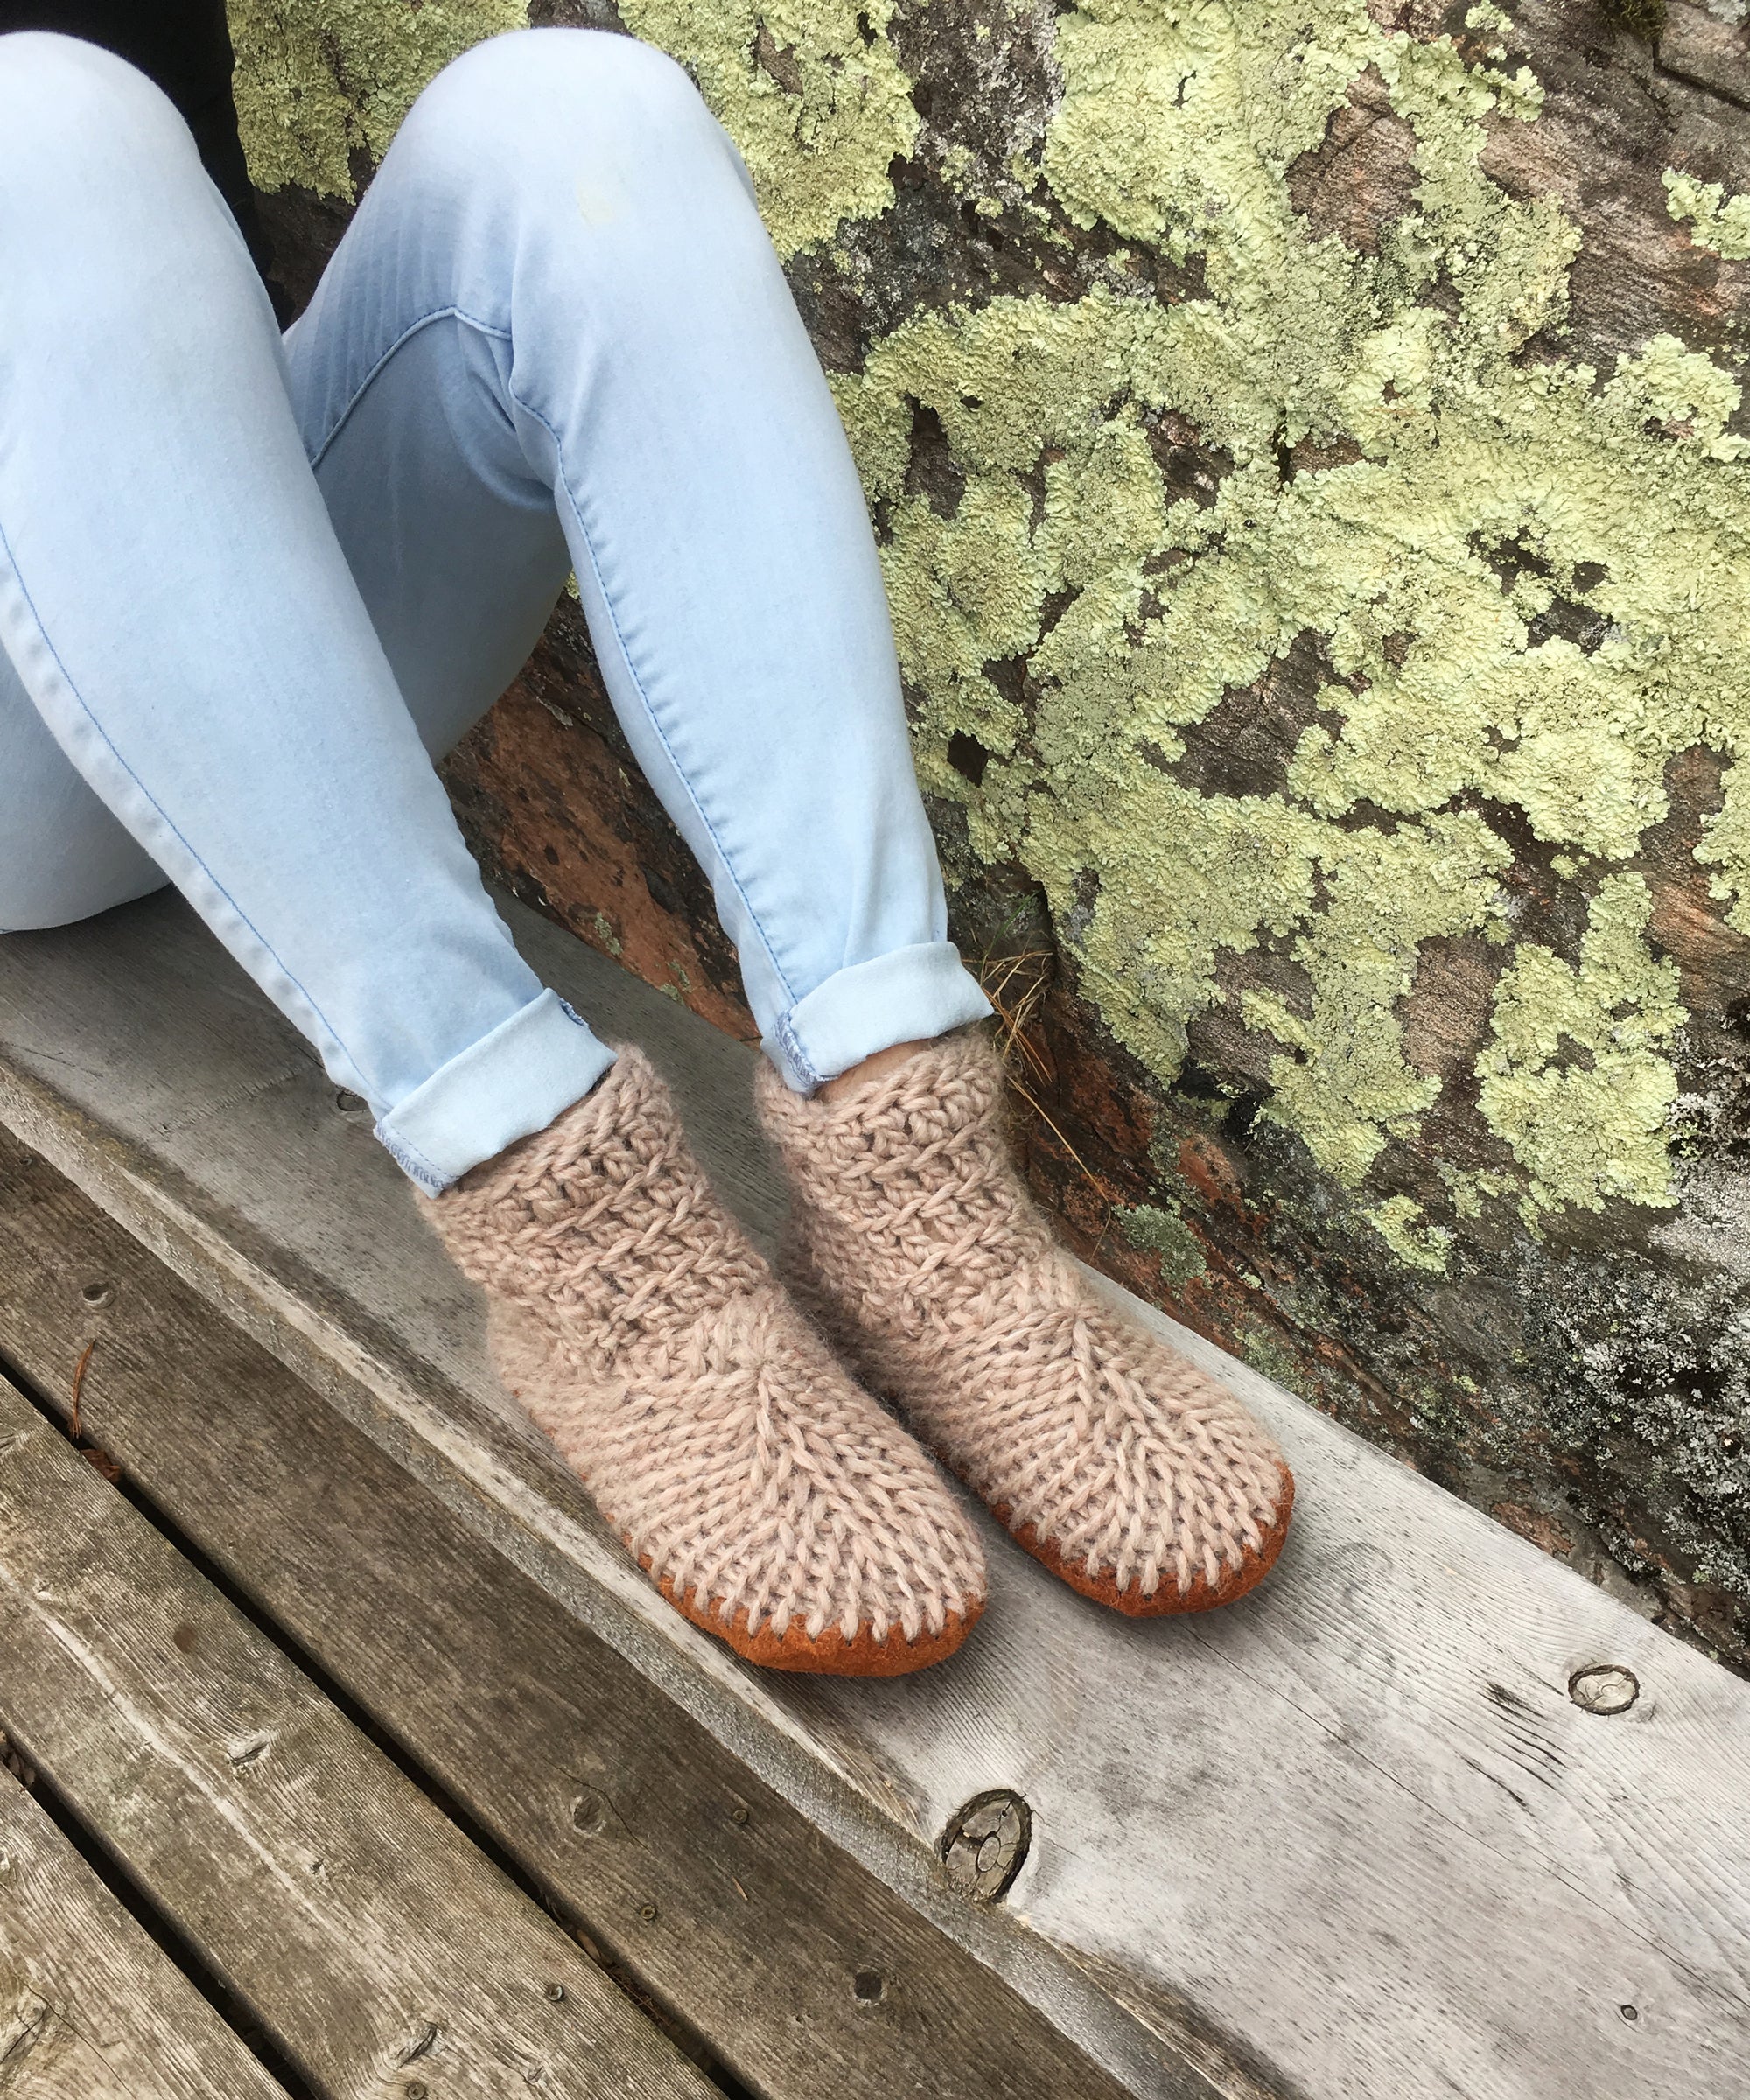 Demi-Boot: Fawn, Beige Merino Wool Bootie Slippers with Leather Soles